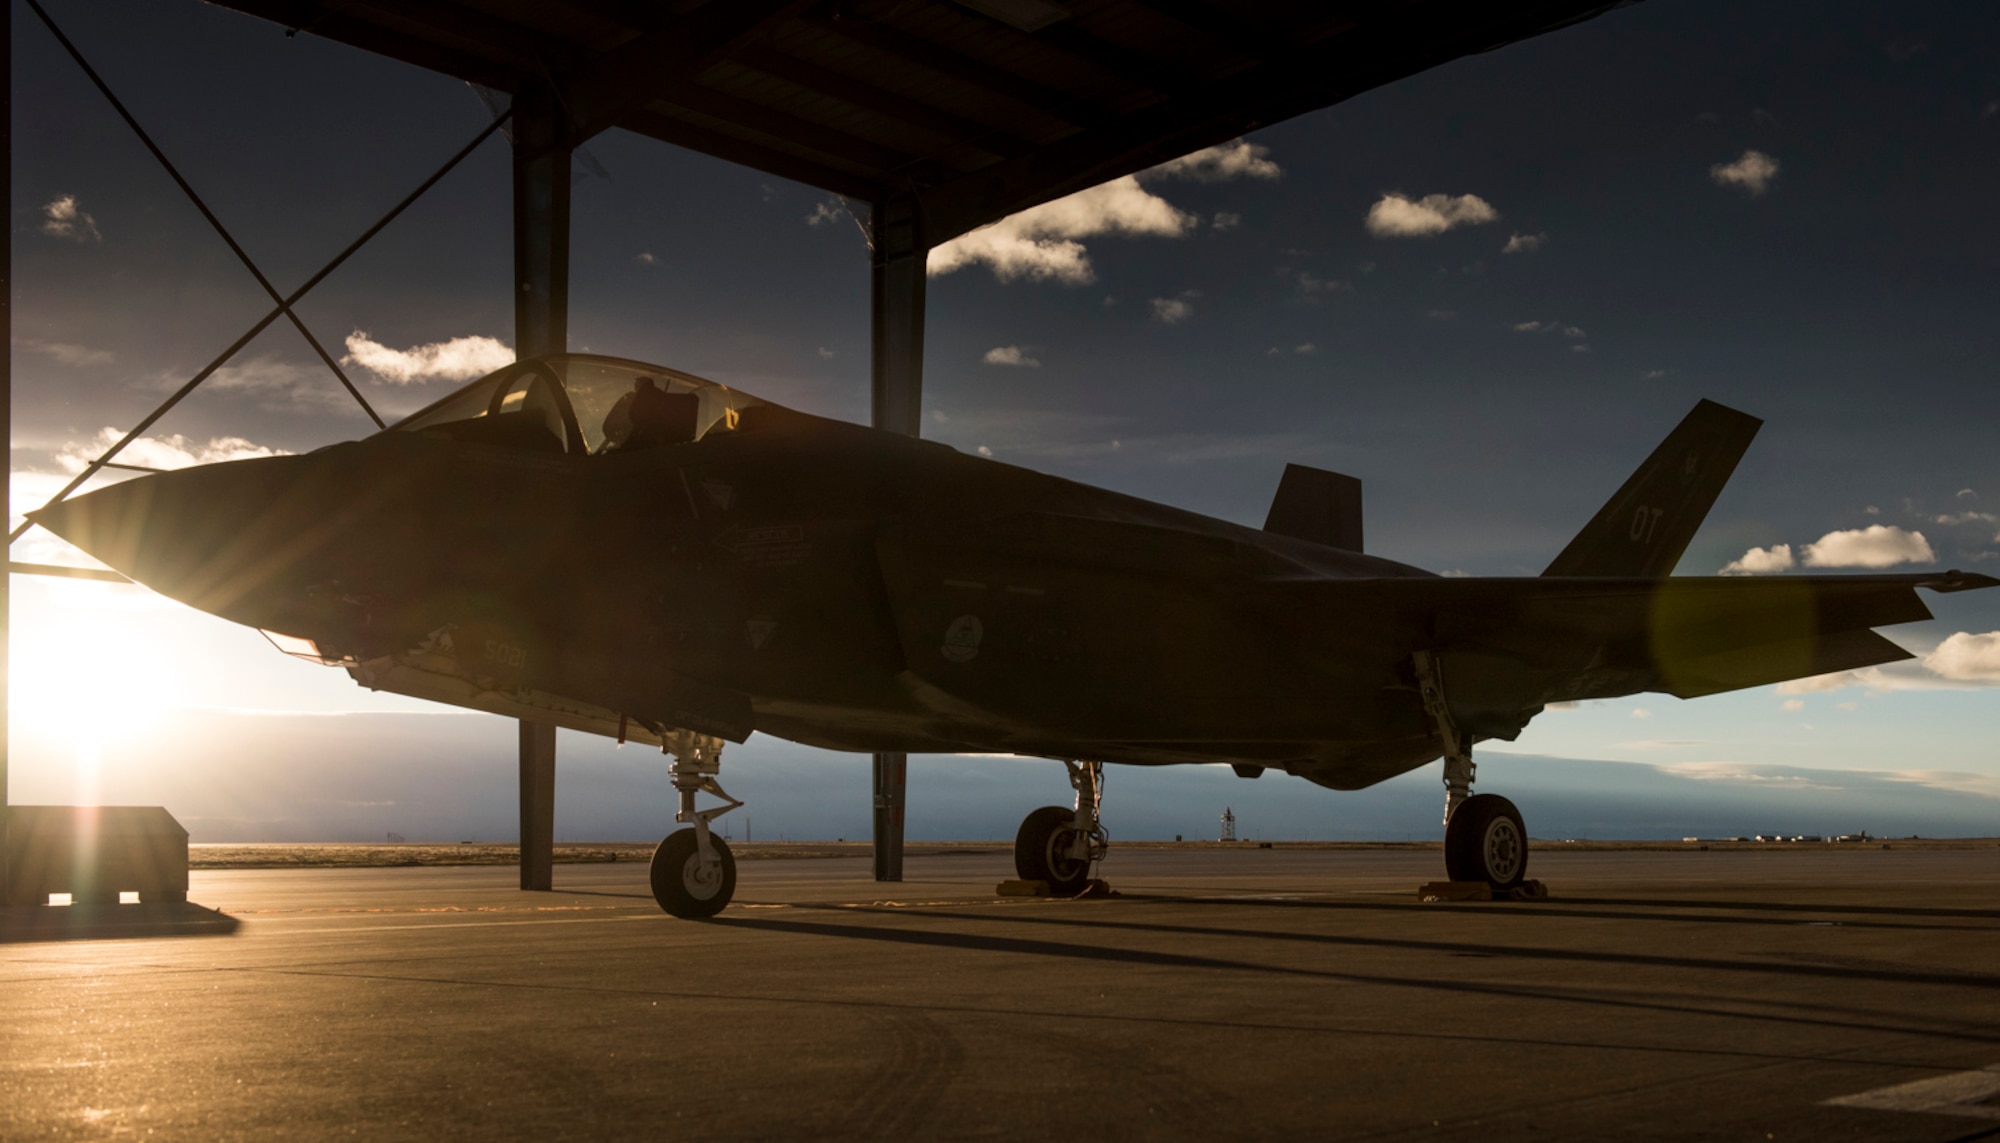 An F-35A parks for the night under the sunshades at Mountain Home Air Force Base, Idaho, Feb. 18, 2016. The F-35s tested their combat capabilities through an operational deployment test at Mountain Home AFB range complexes.(U.S. Air Force photo/Senior Airman Jeremy L. Mosier)